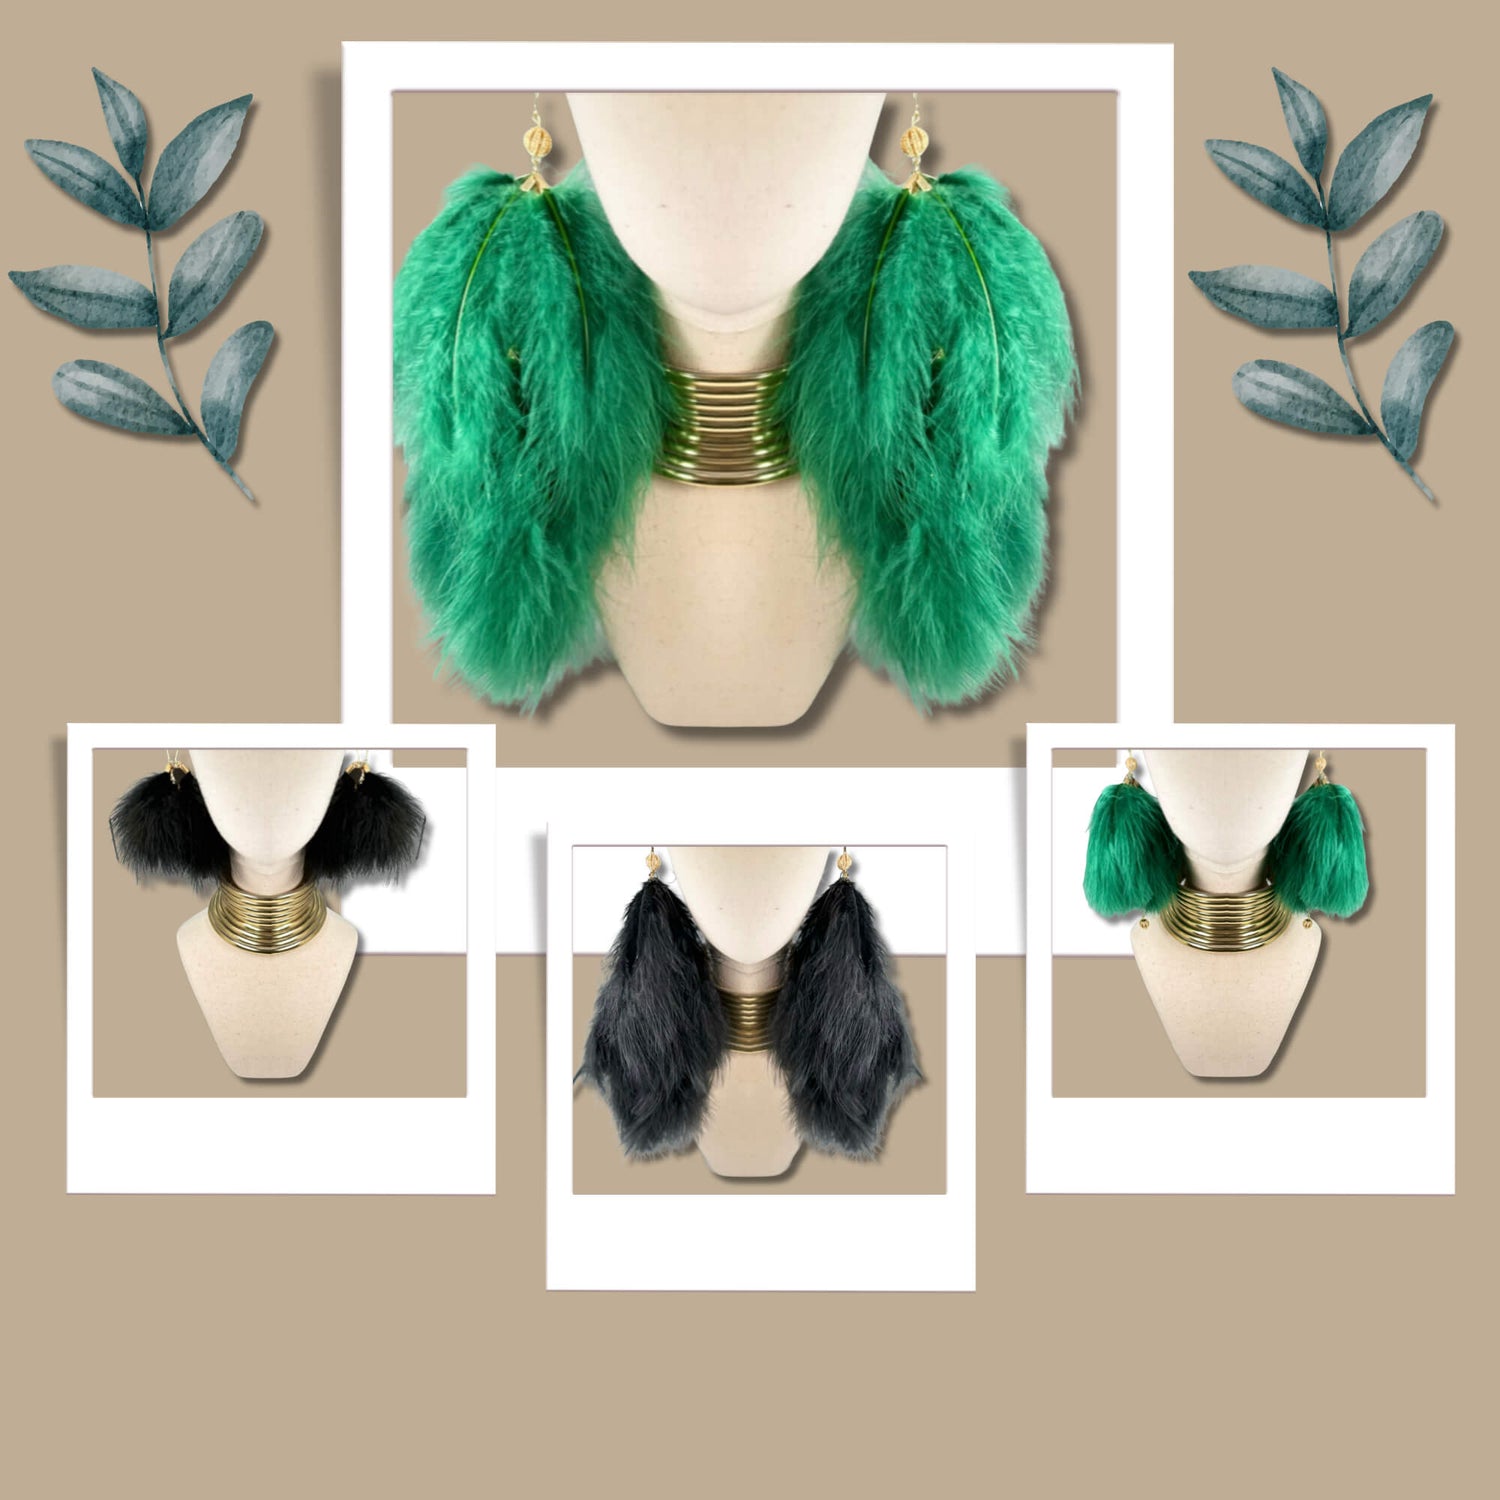 My Feather Earrings Build Your Own Basket